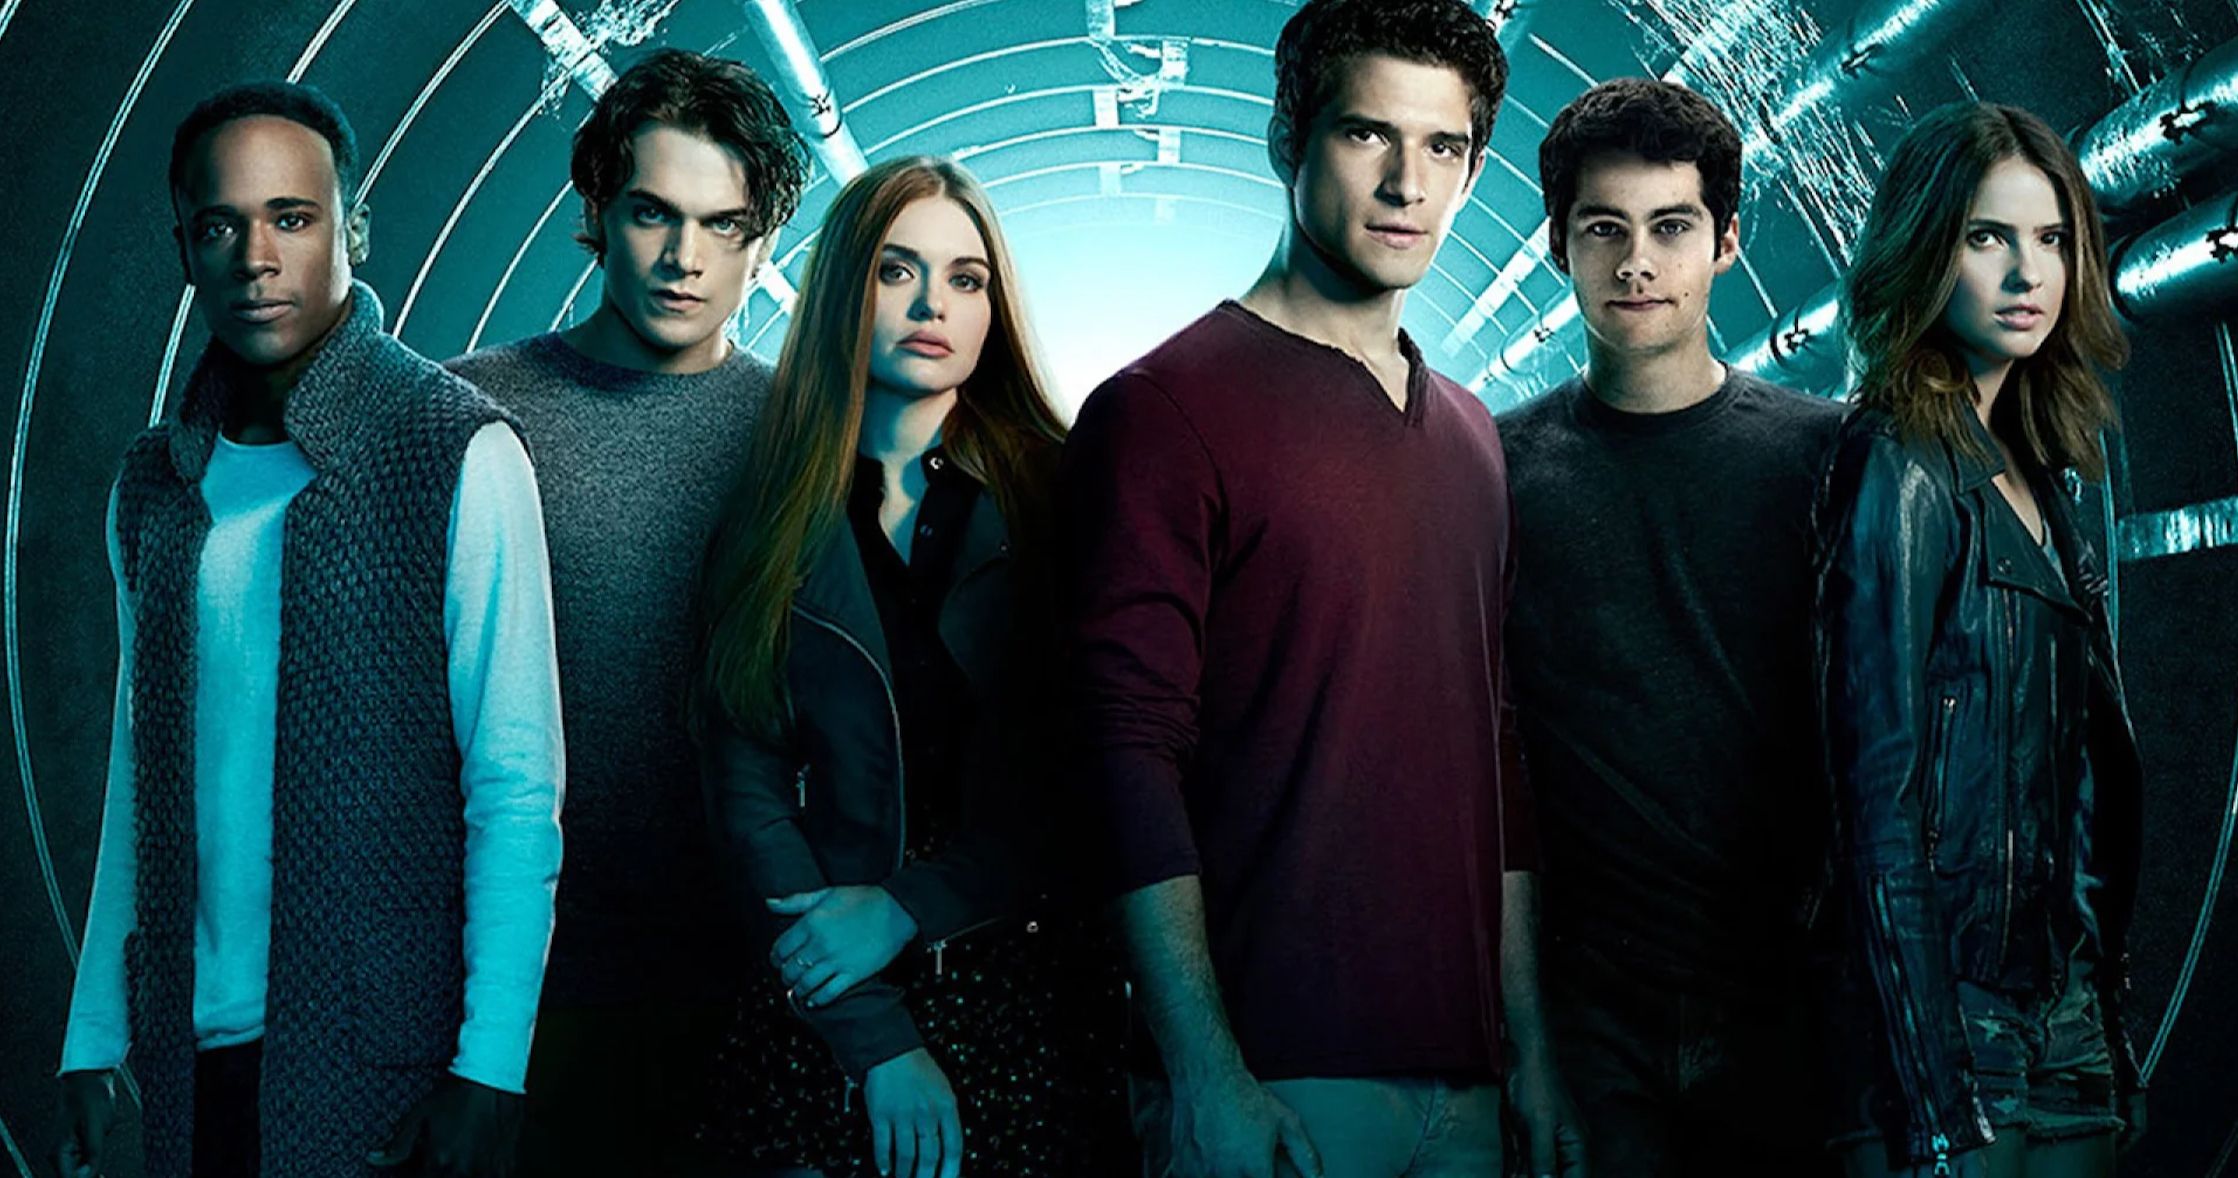 Teen Wolf the Movie Teaser Announces Sequel to MTV Series, Along with New Wolf Pack TV Show